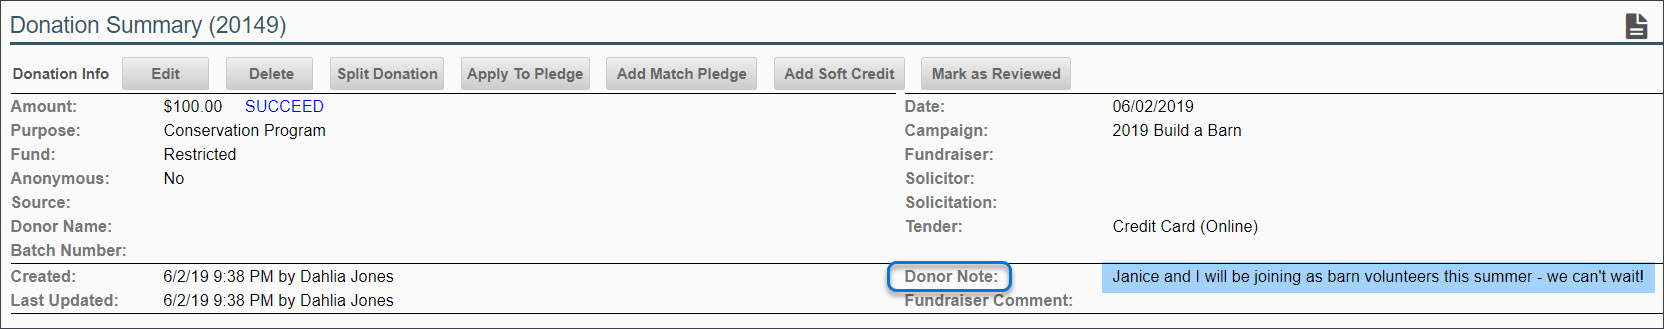 zd_donorNote_in_details.jpg